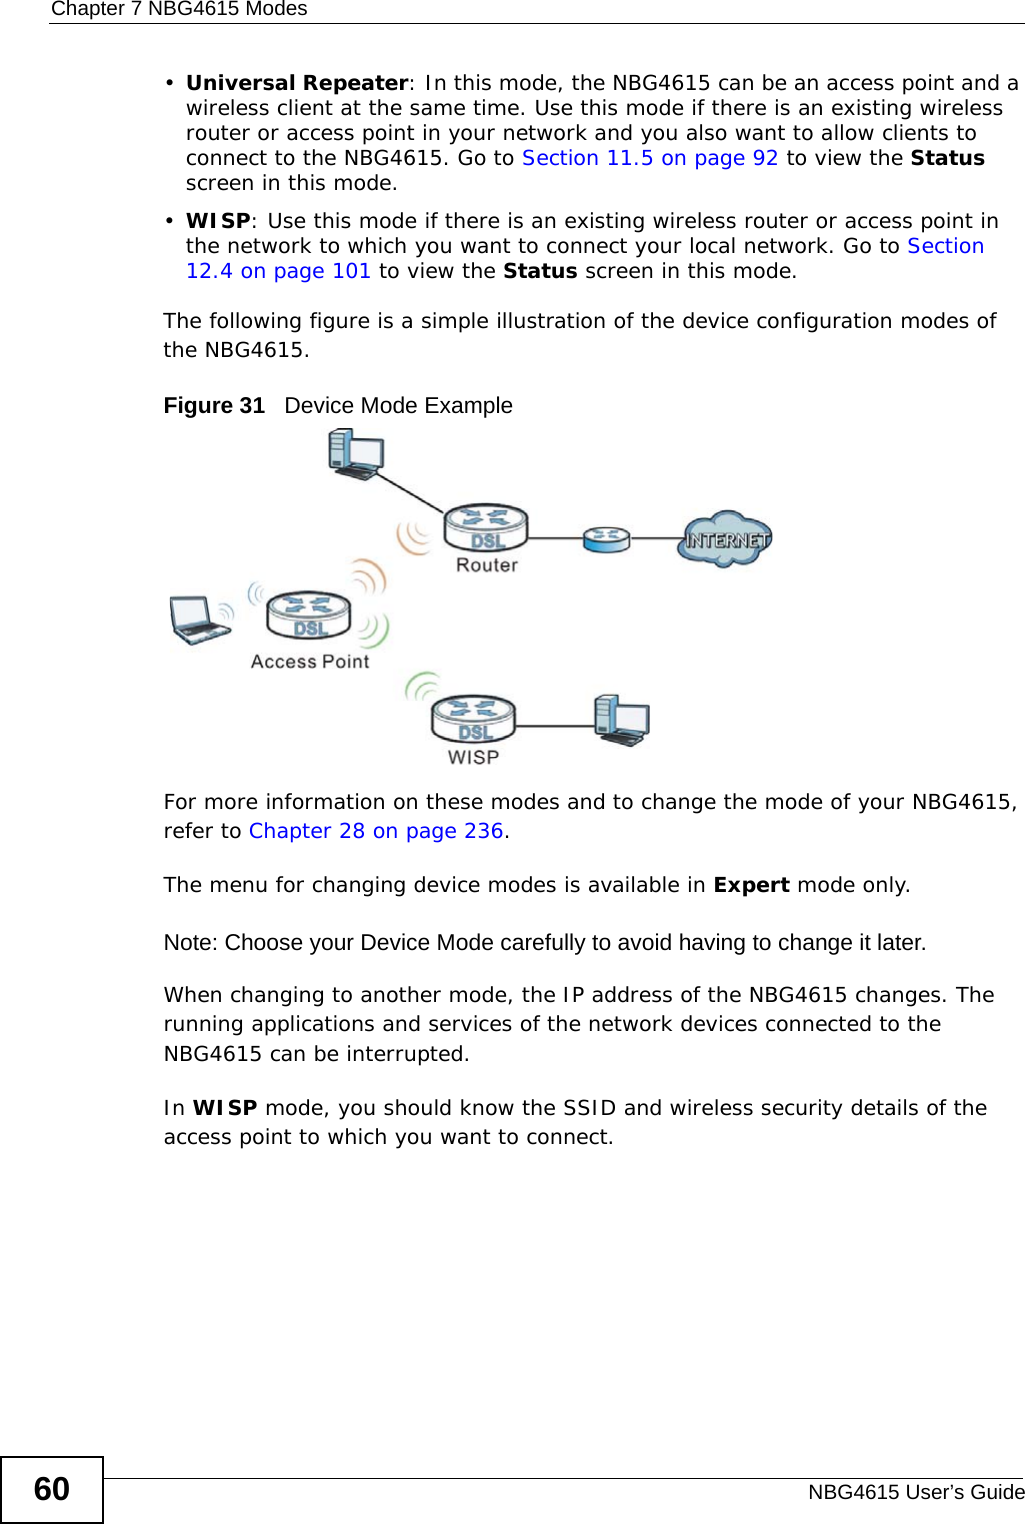 Chapter 7 NBG4615 ModesNBG4615 User’s Guide60•Universal Repeater: In this mode, the NBG4615 can be an access point and a wireless client at the same time. Use this mode if there is an existing wireless router or access point in your network and you also want to allow clients to connect to the NBG4615. Go to Section 11.5 on page 92 to view the Status screen in this mode.•WISP: Use this mode if there is an existing wireless router or access point in the network to which you want to connect your local network. Go to Section 12.4 on page 101 to view the Status screen in this mode.The following figure is a simple illustration of the device configuration modes of the NBG4615.Figure 31   Device Mode ExampleFor more information on these modes and to change the mode of your NBG4615, refer to Chapter 28 on page 236.The menu for changing device modes is available in Expert mode only. Note: Choose your Device Mode carefully to avoid having to change it later.When changing to another mode, the IP address of the NBG4615 changes. The running applications and services of the network devices connected to the NBG4615 can be interrupted. In WISP mode, you should know the SSID and wireless security details of the access point to which you want to connect.